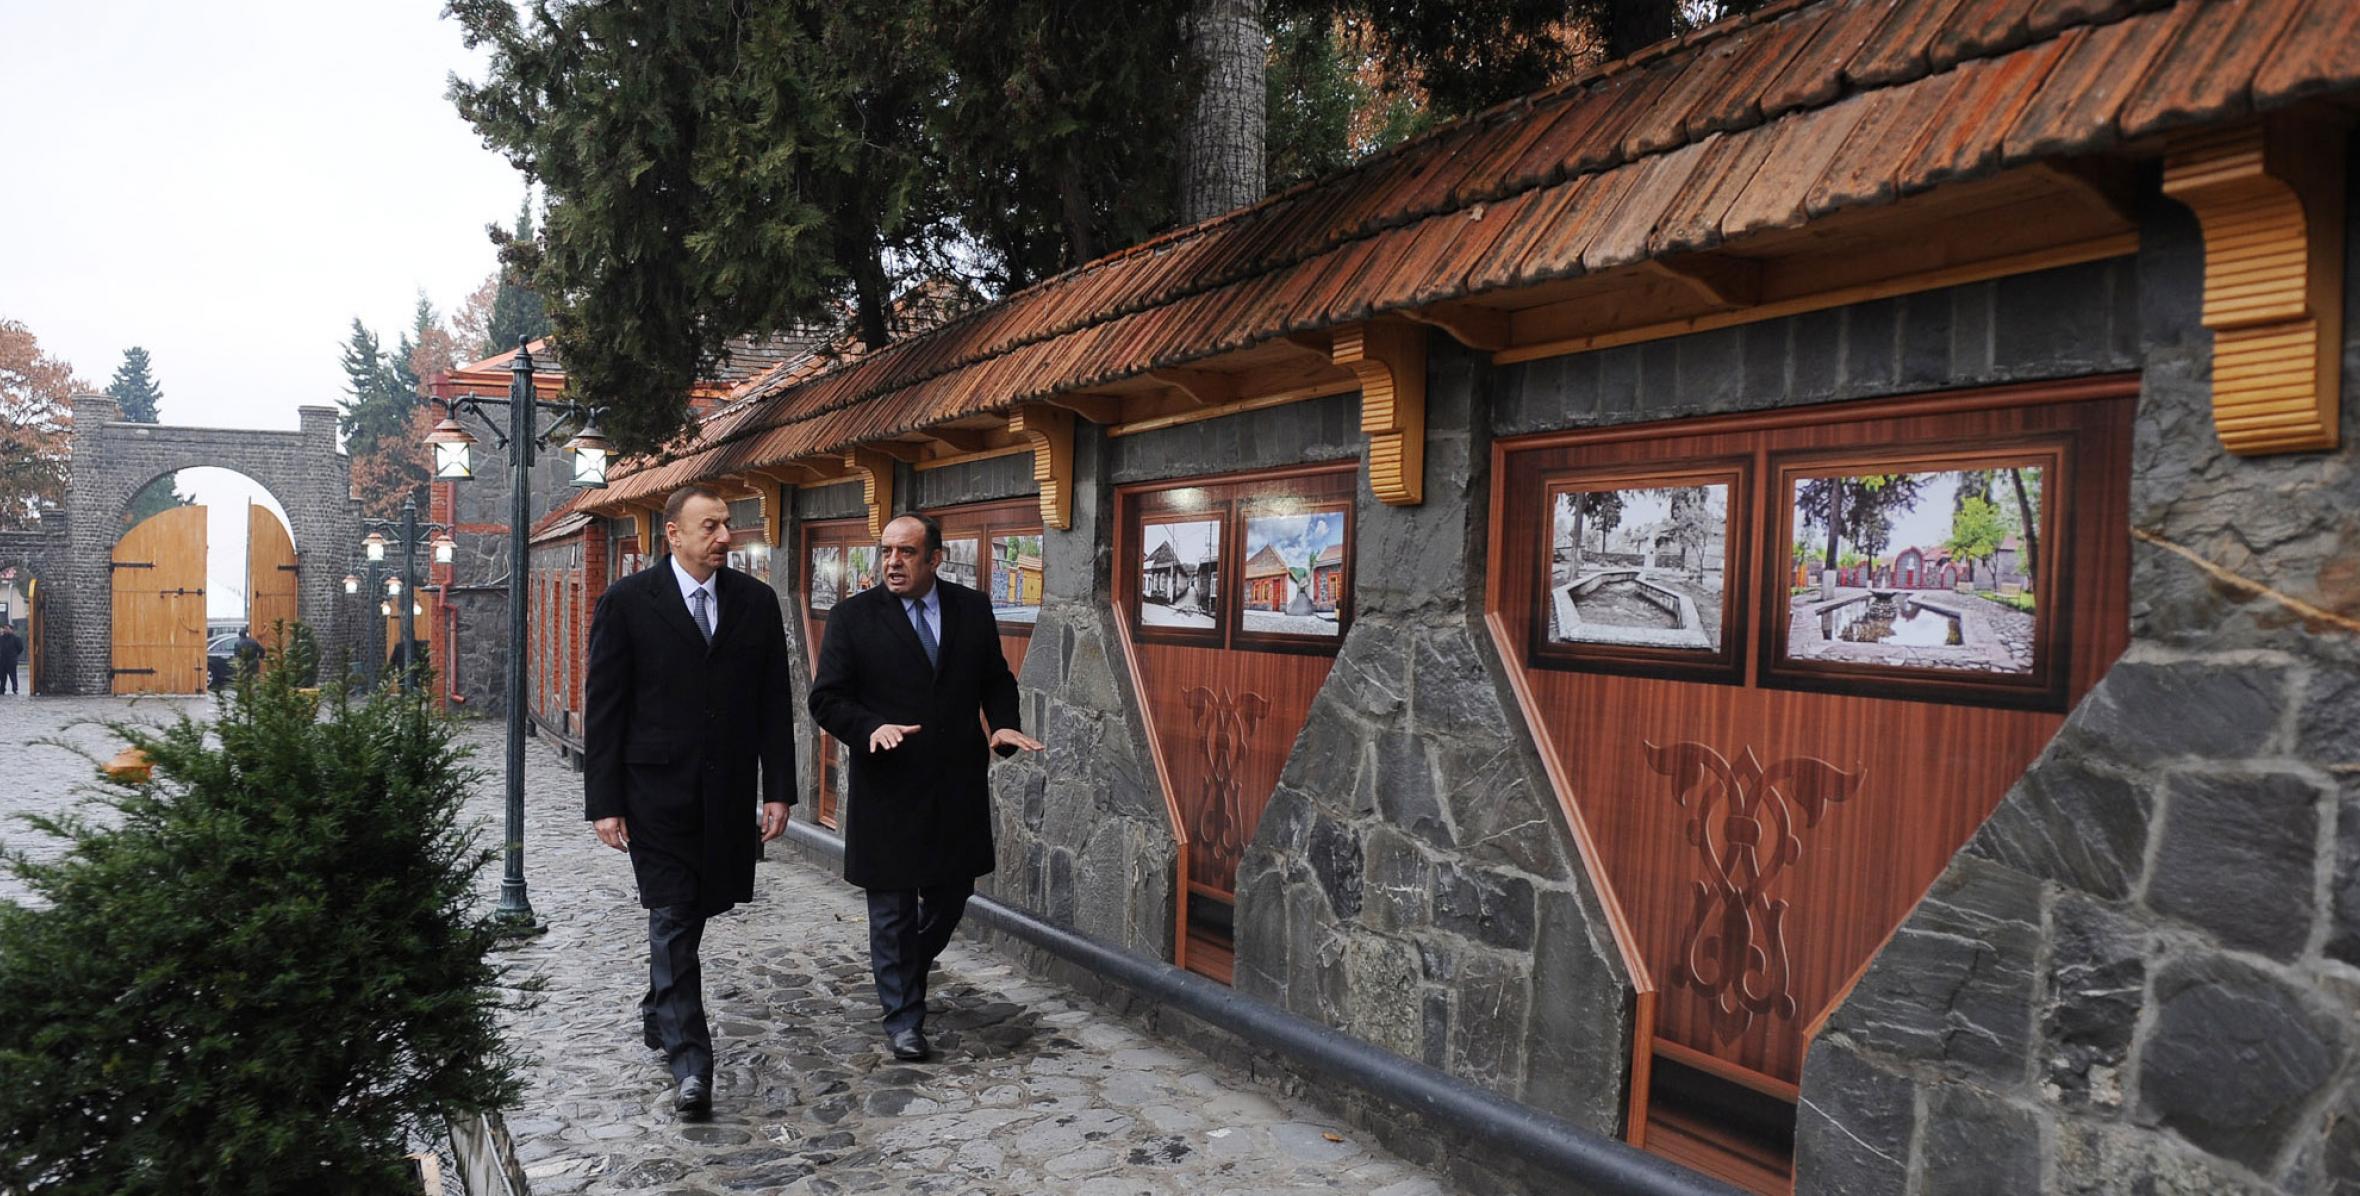 Ilham Aliyev reviewed the Icheribazar fortress in Gakh after construction and restoration